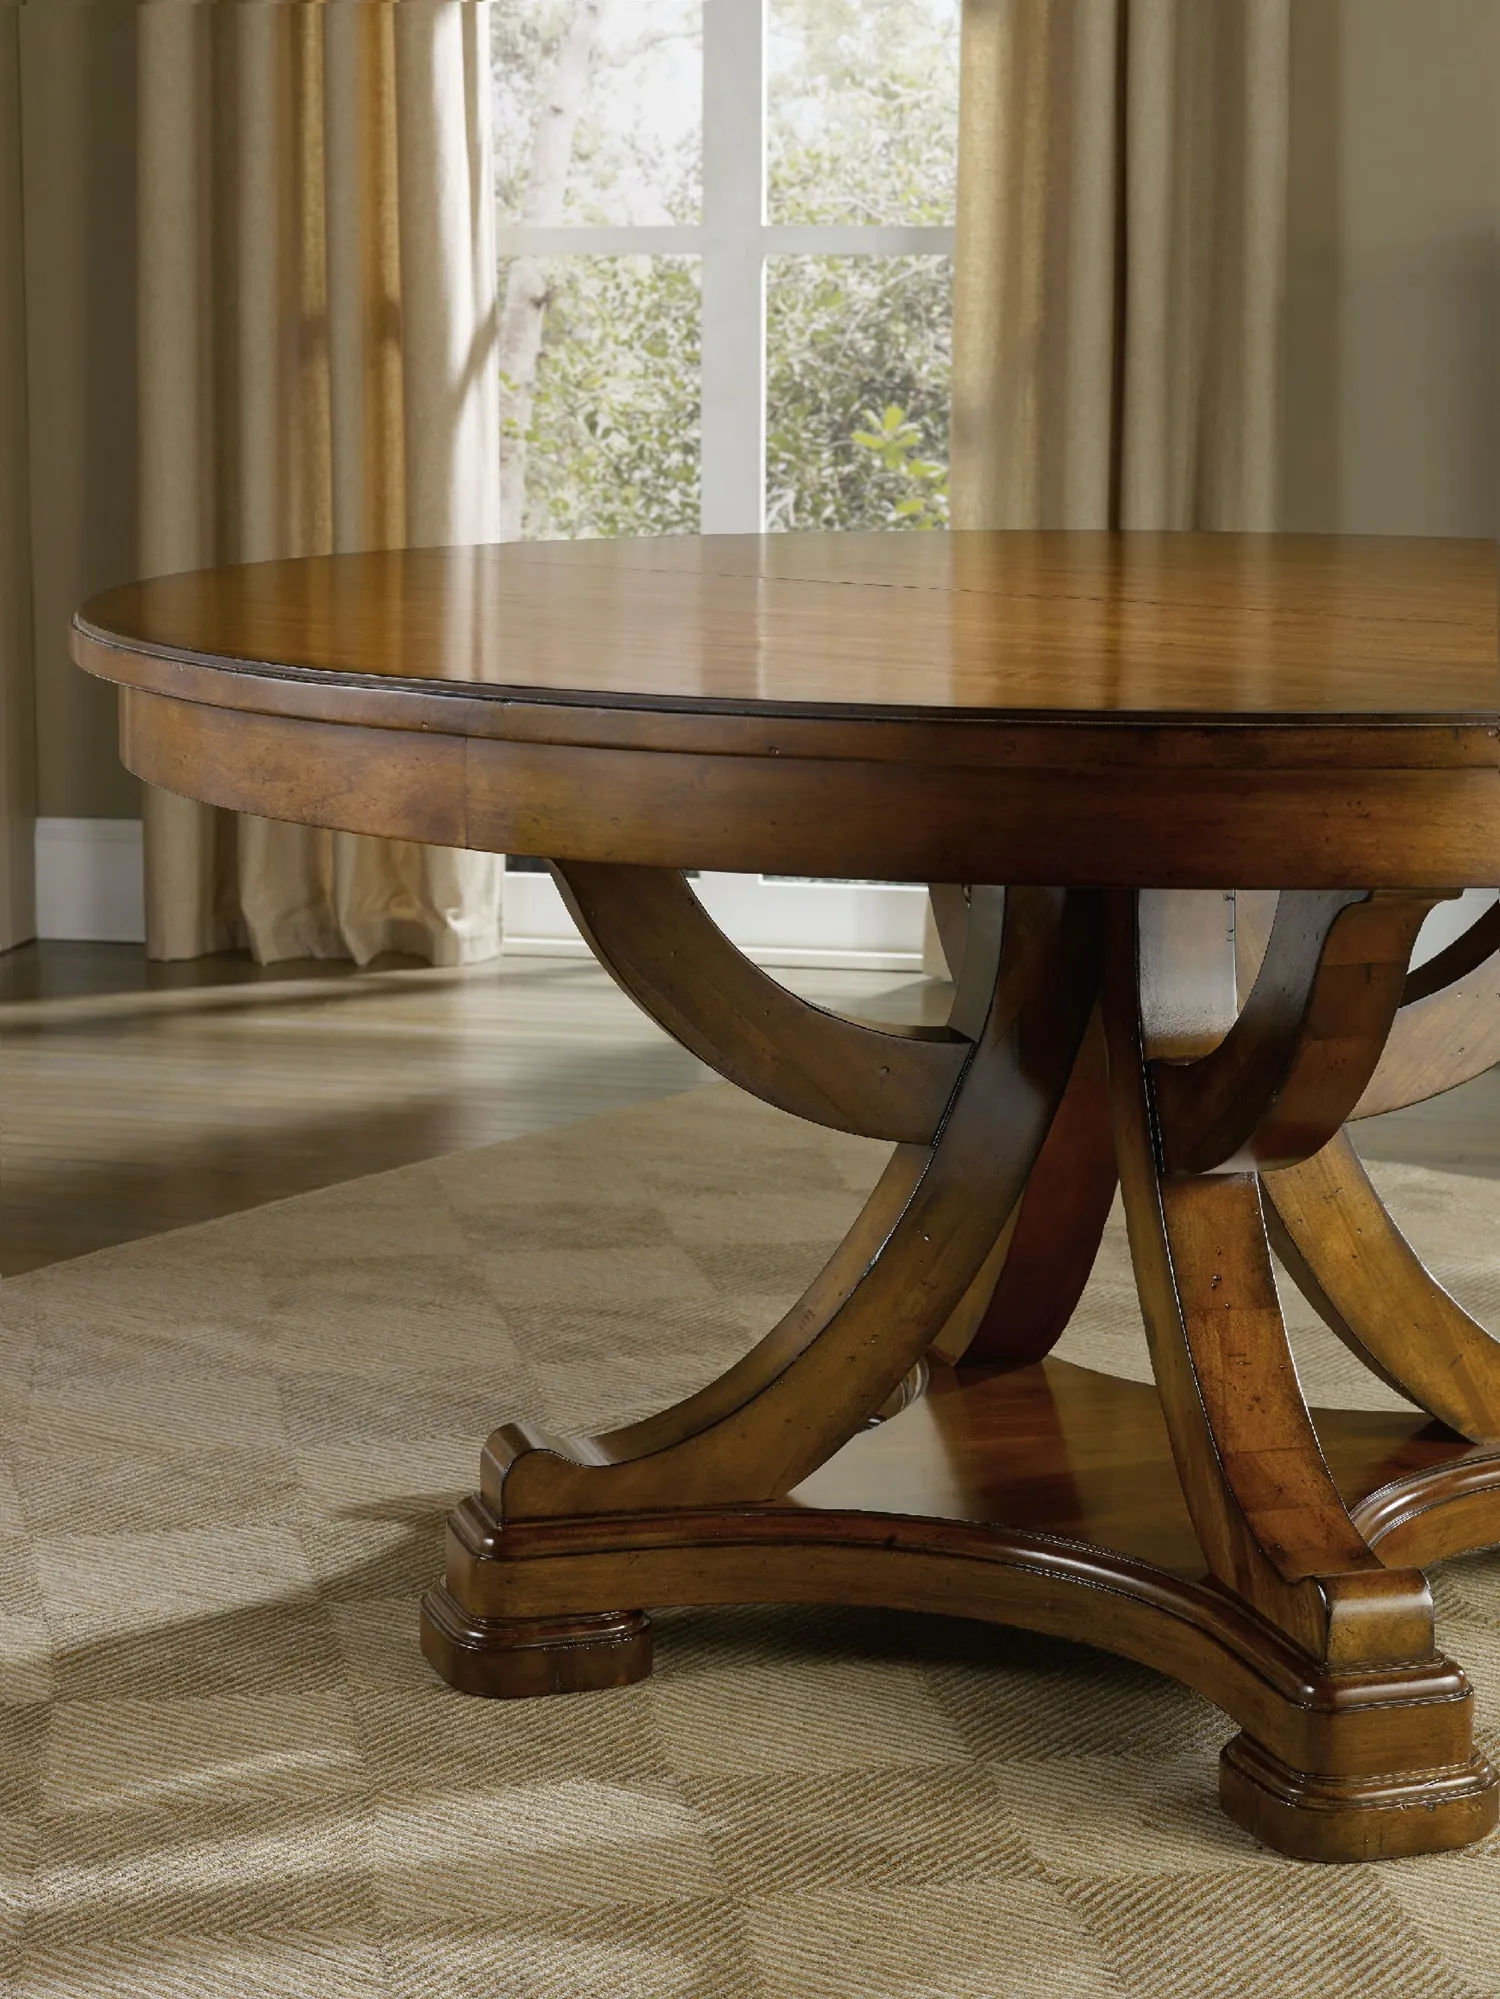 TYNECASTLE ROUND PEDESTAL DINING TABLE WITH ONE 18 INCH LEAF